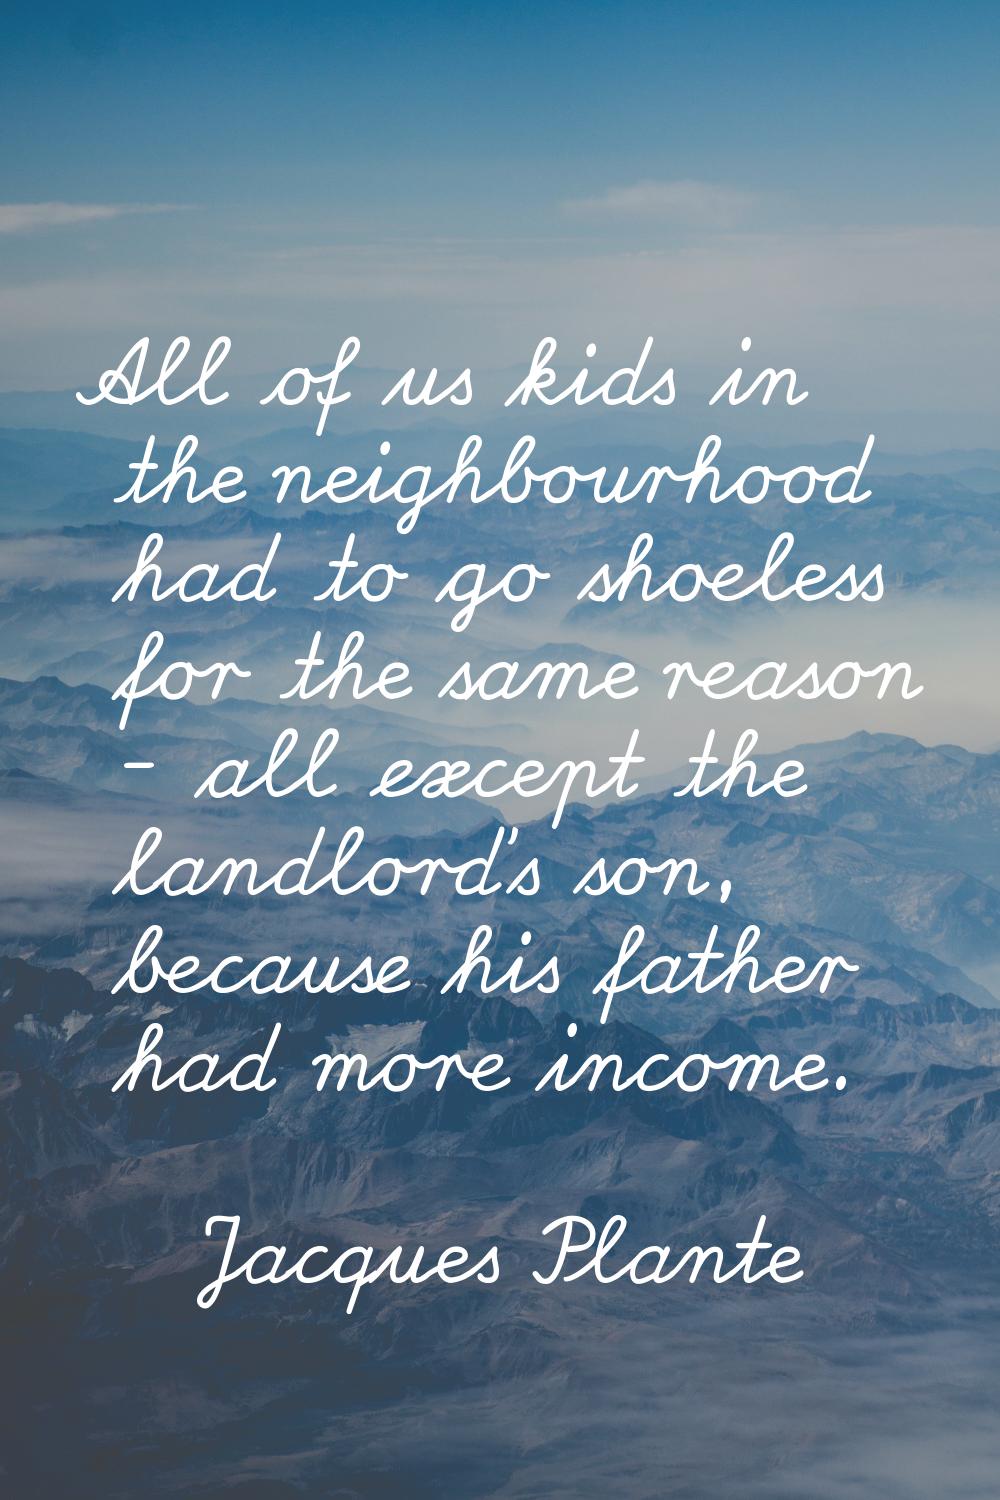 All of us kids in the neighbourhood had to go shoeless for the same reason - all except the landlor